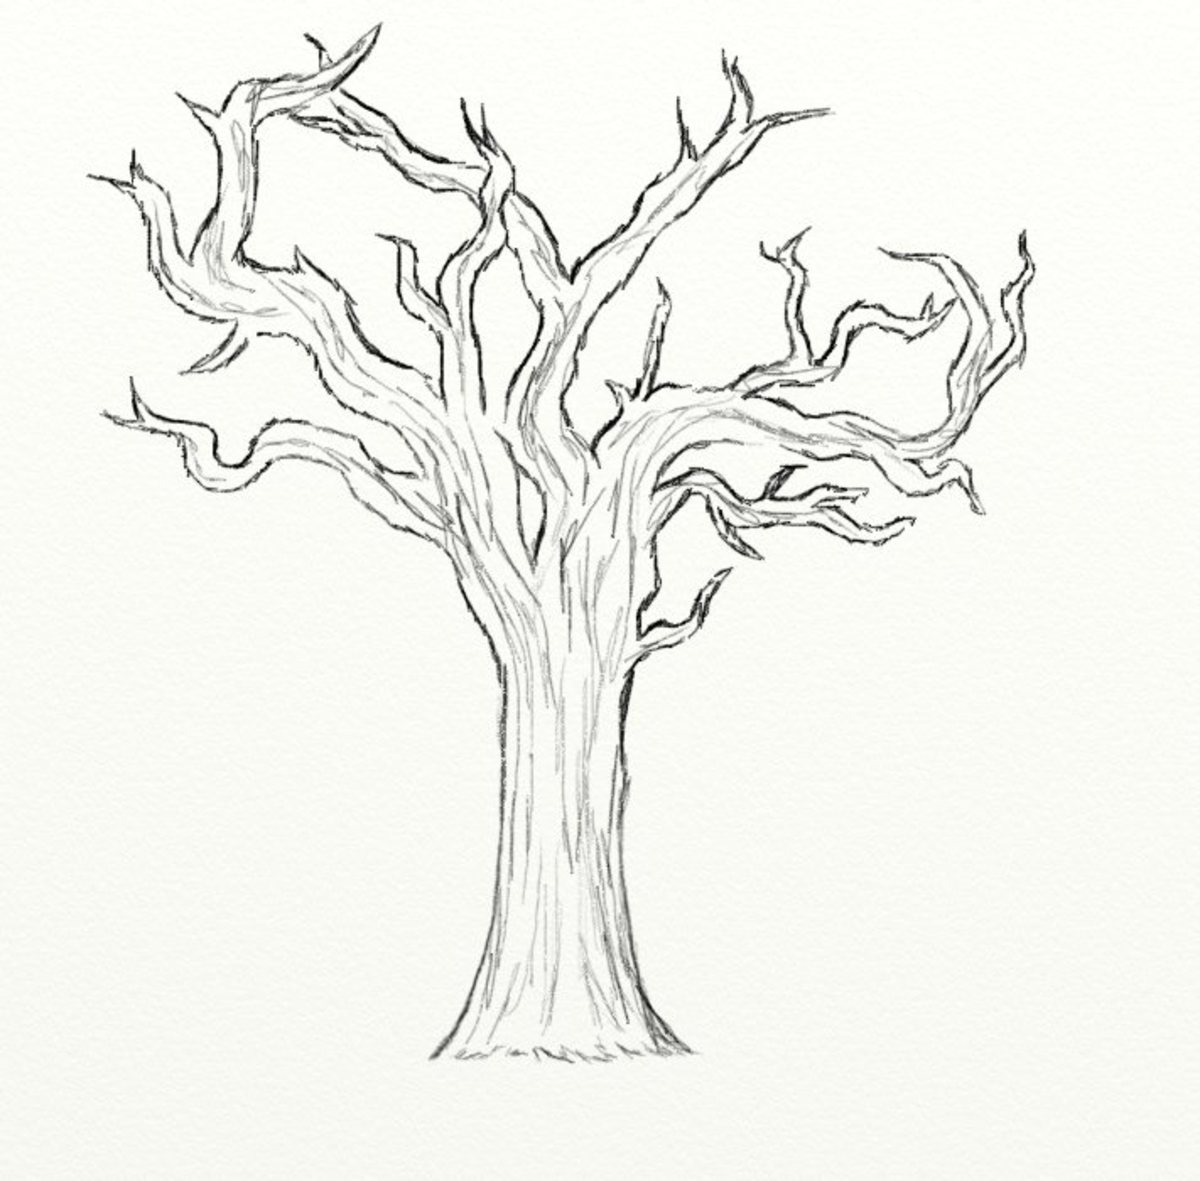 How to Draw a Dead Tree - FeltMagnet